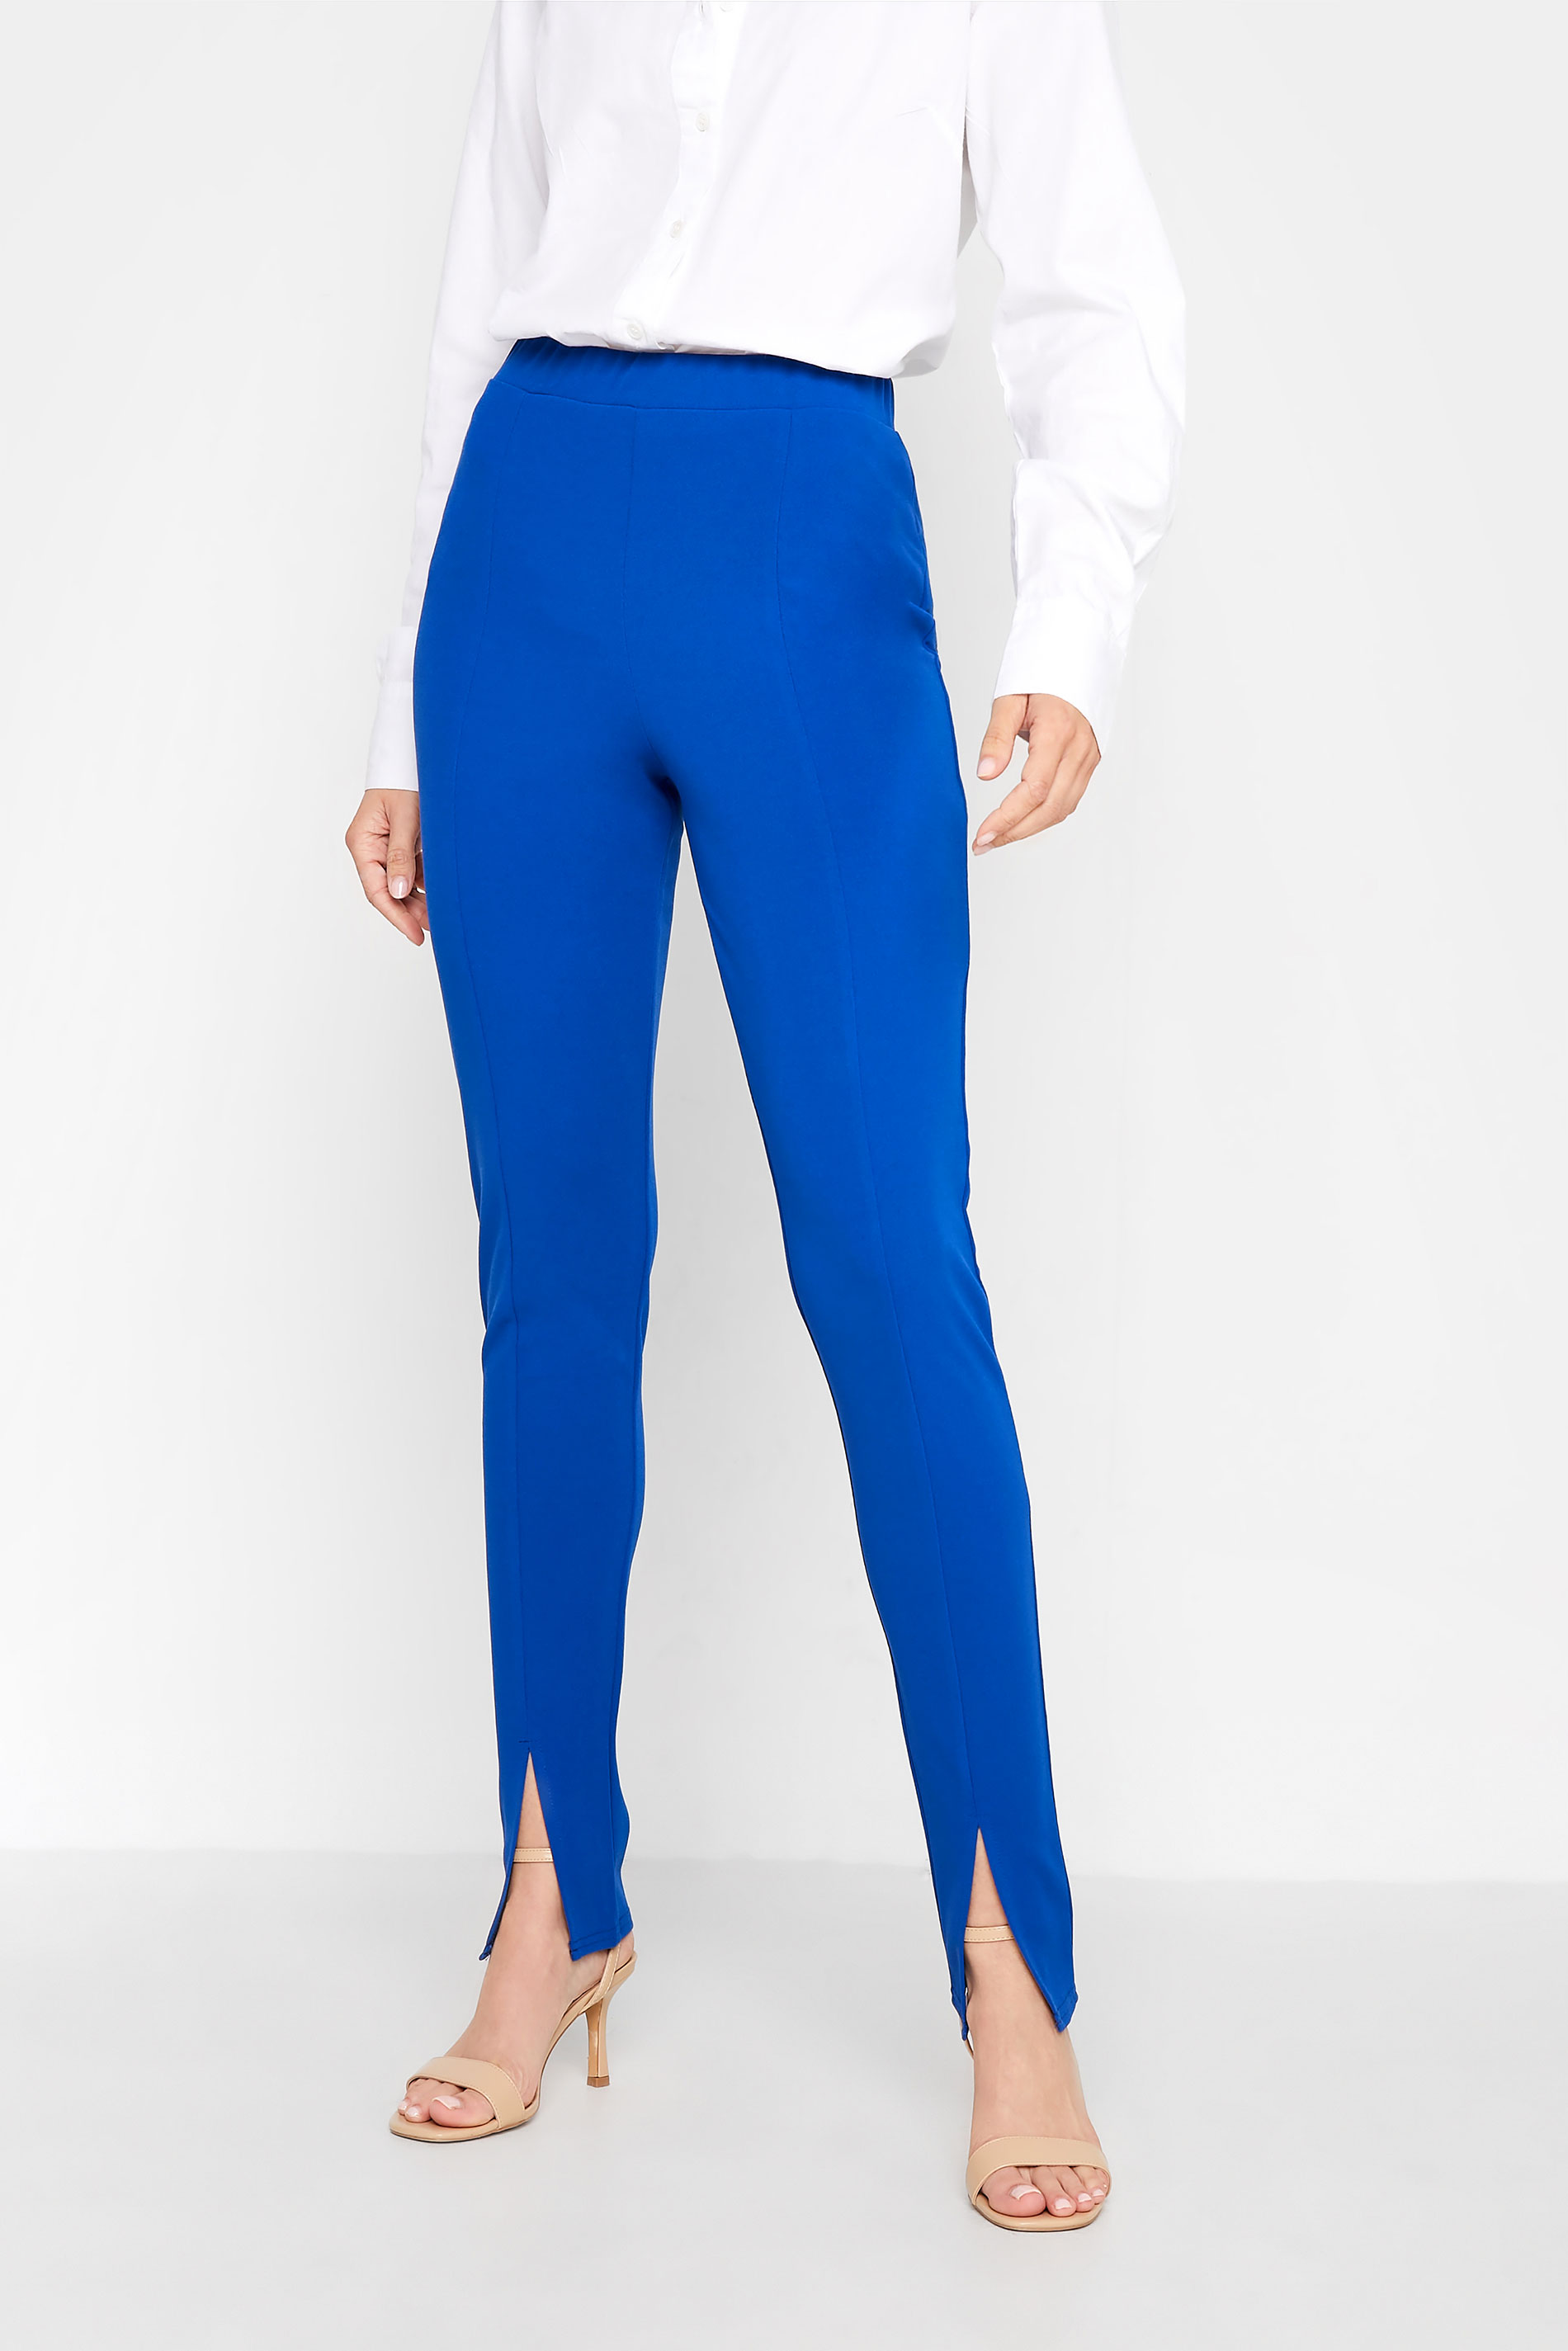 I Tried On Every Pair of SplitFront Leggings I Could FindFrom The Row to  HM  New look fashion Zara fashion Leggings fashion